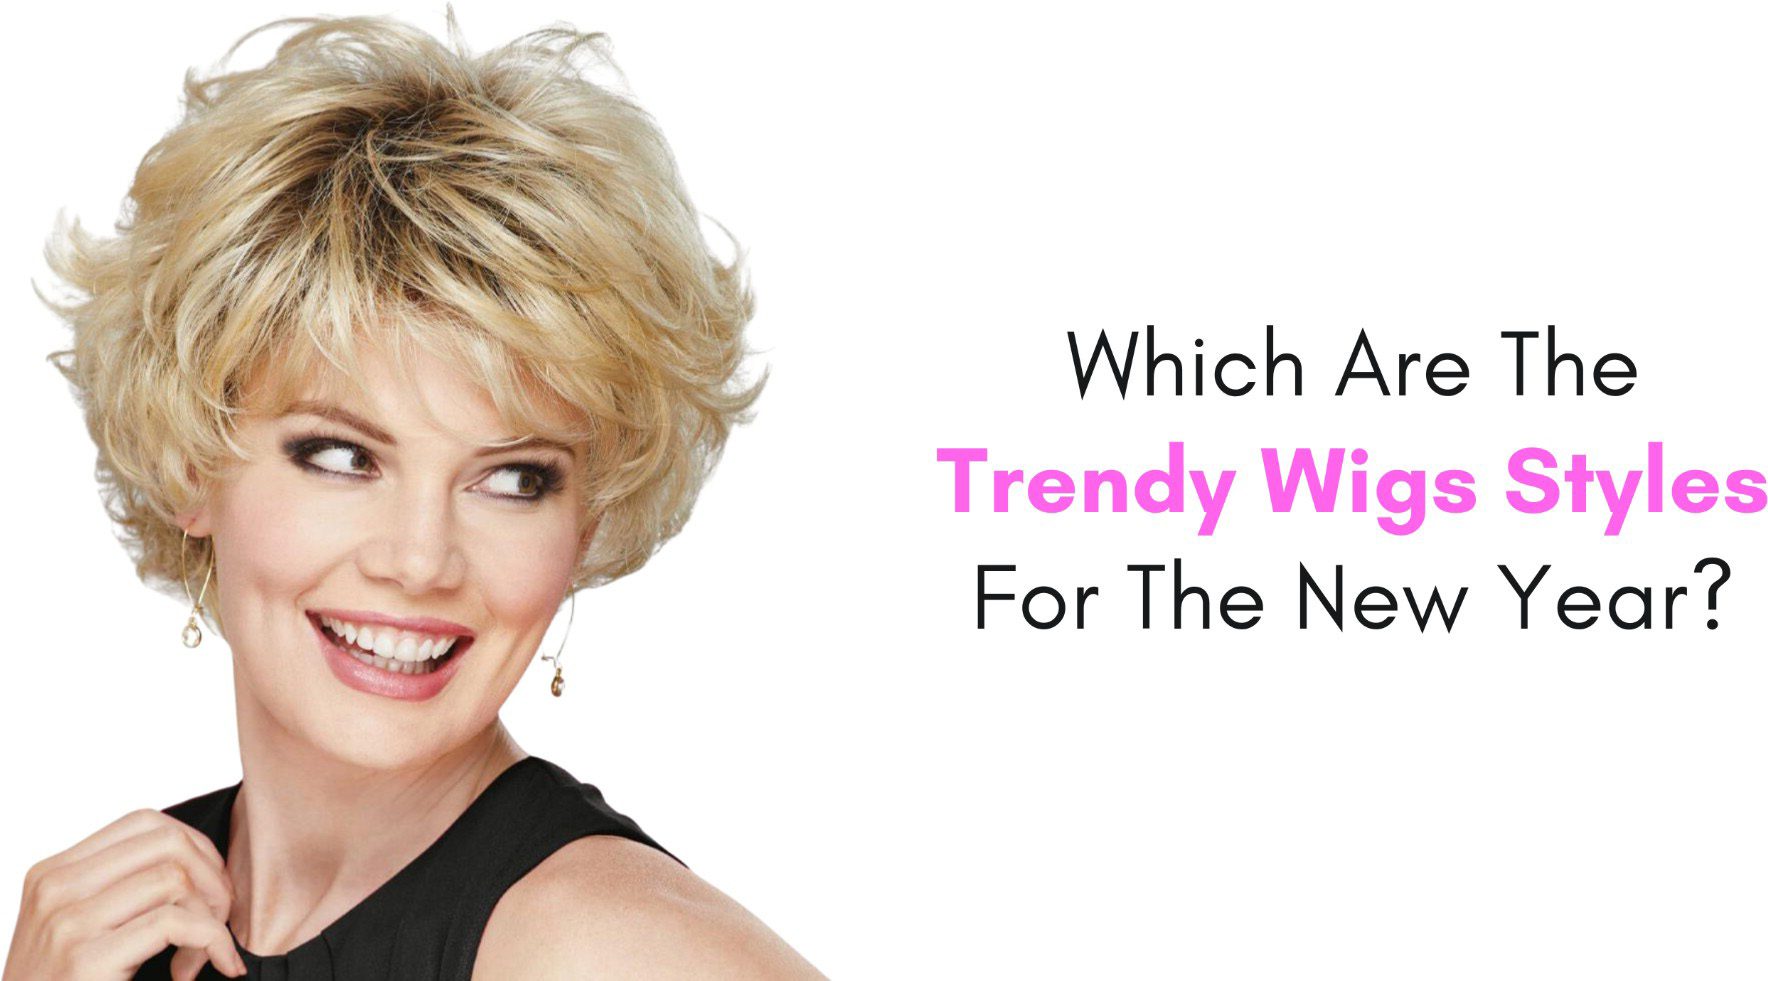 which are the trendy wigs styles for the new year